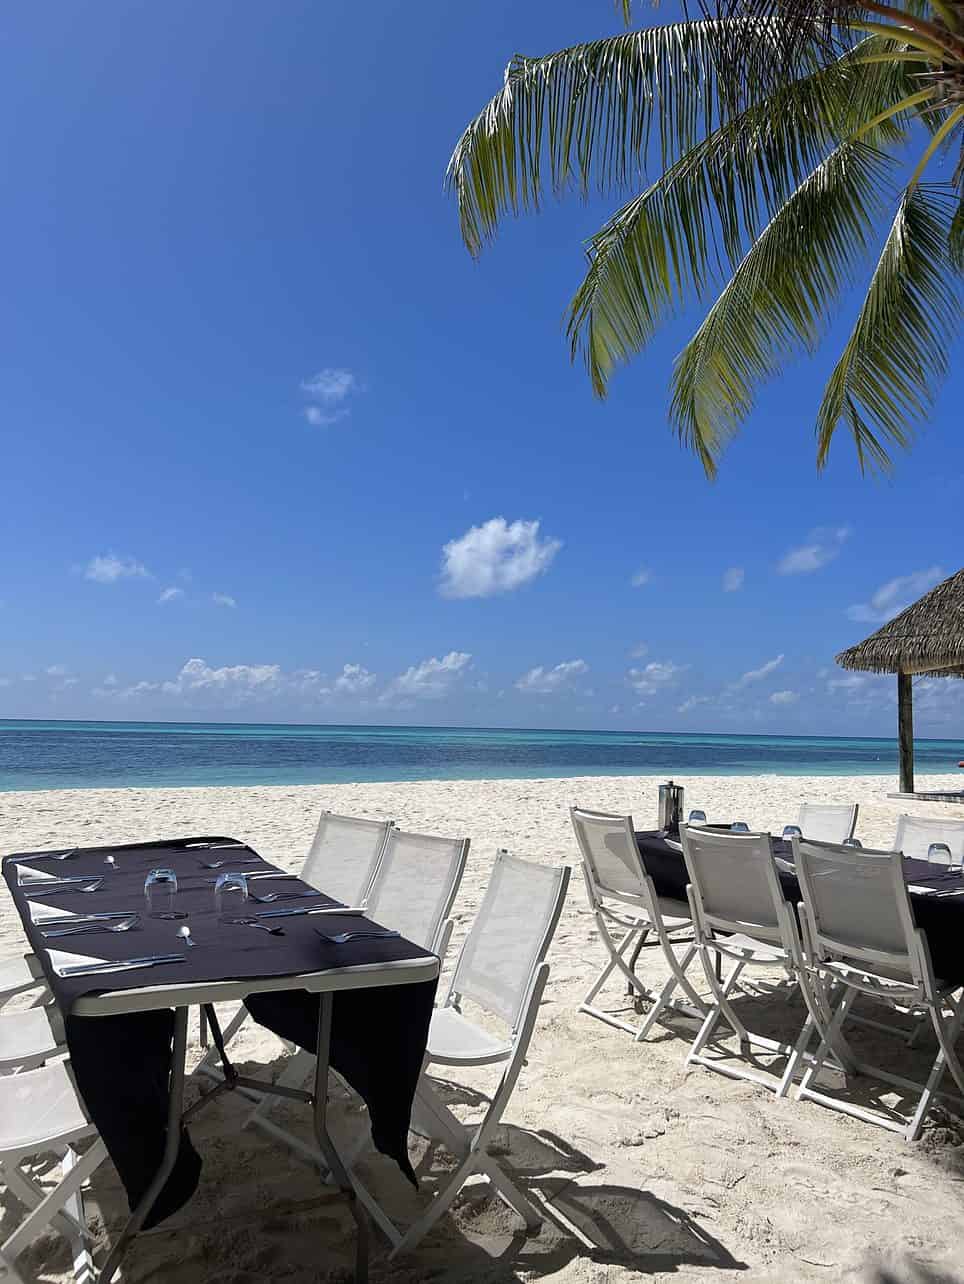 Lunch time, Maldives - Eating on the beach